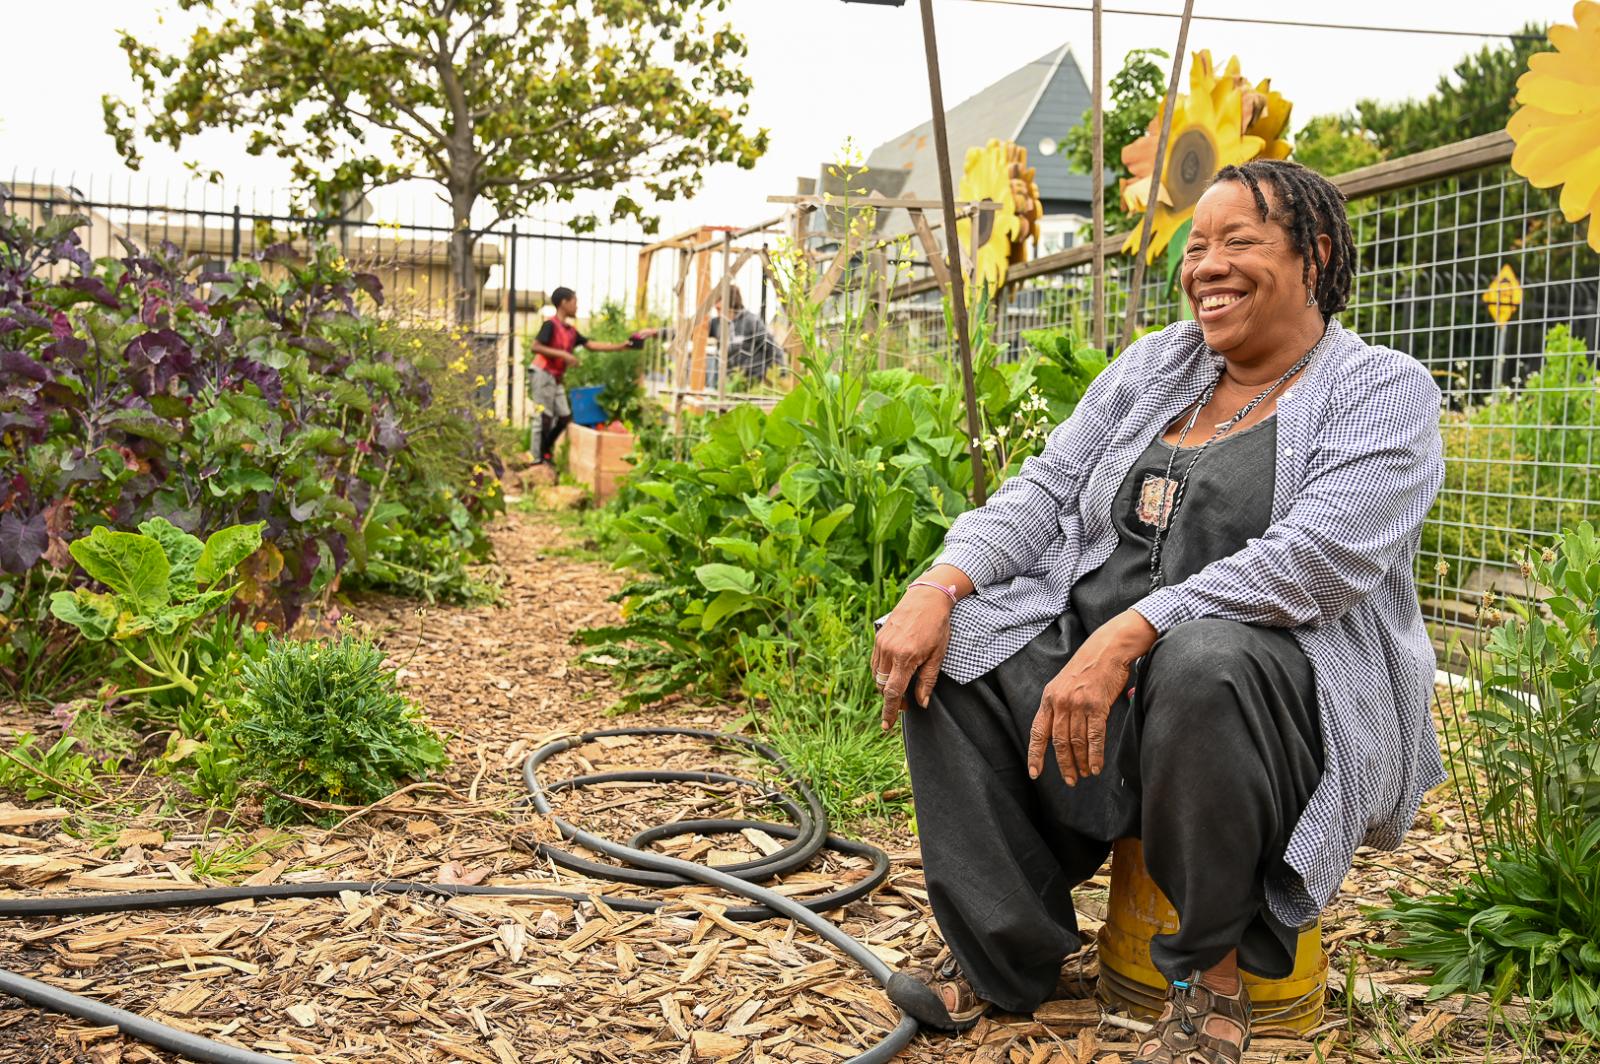 Wanda Stewart is a Trusted Leader in East Bay's Food Justice Movement. - 